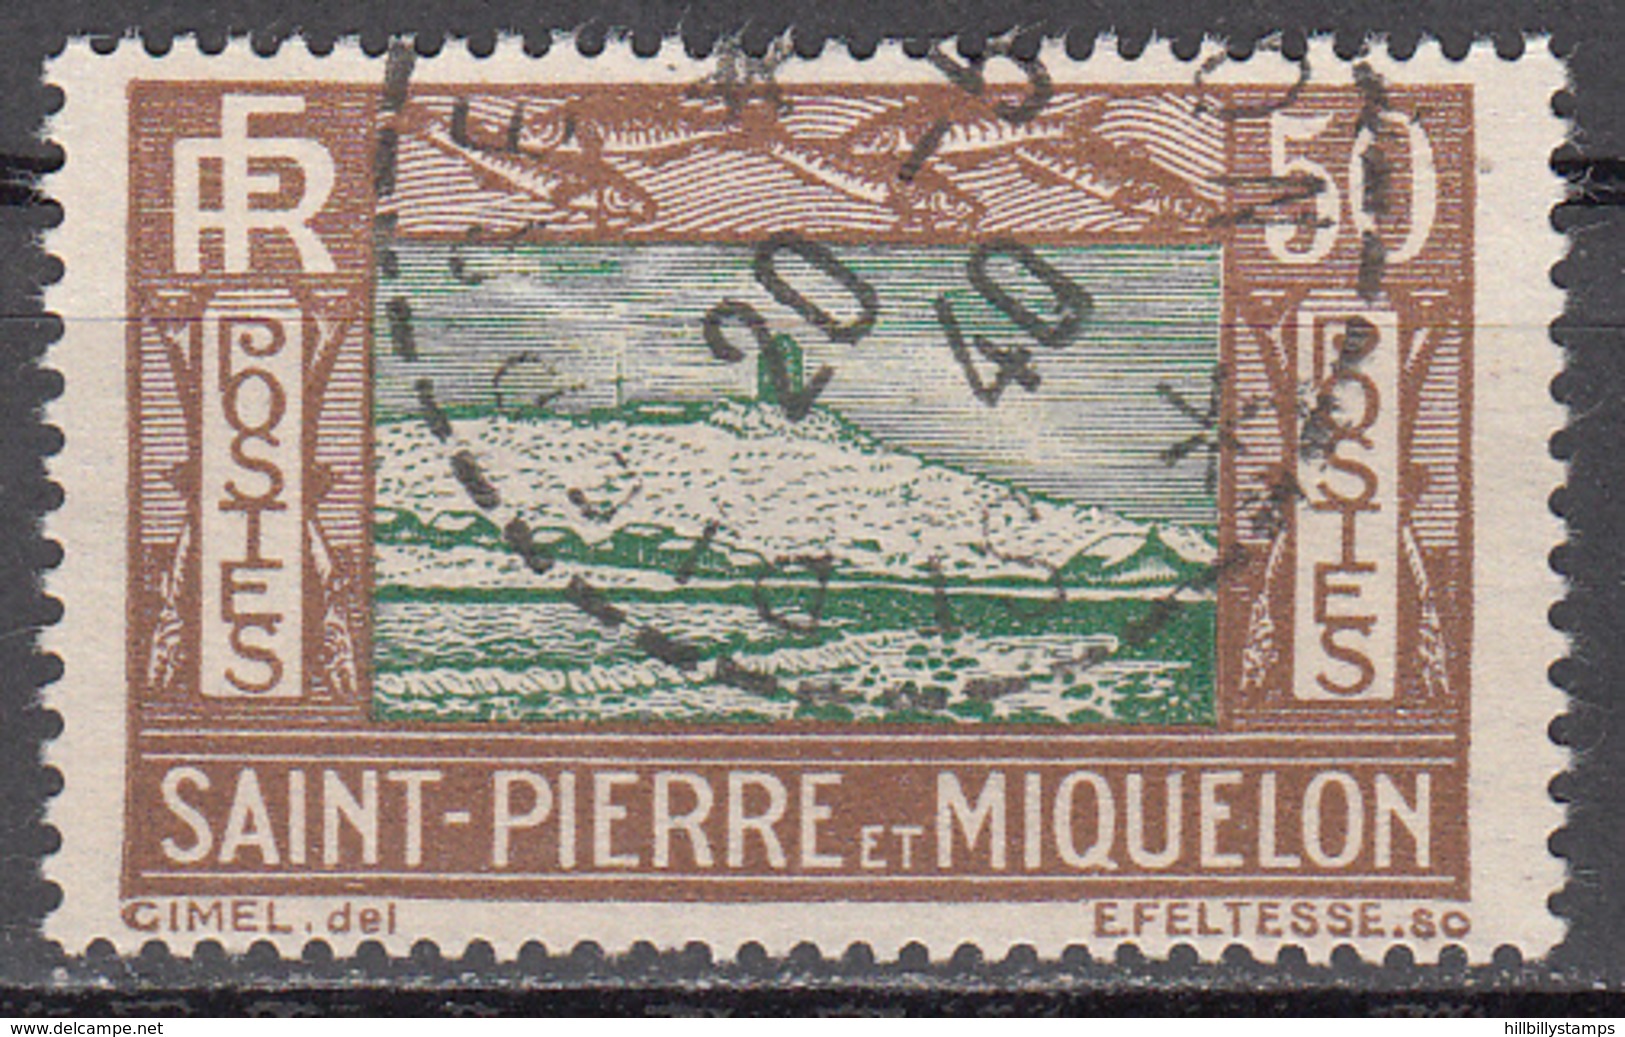 ST. PIERRE AND MIQUELON    SCOTT NO. 147    USED    YEAR  1932 - Used Stamps